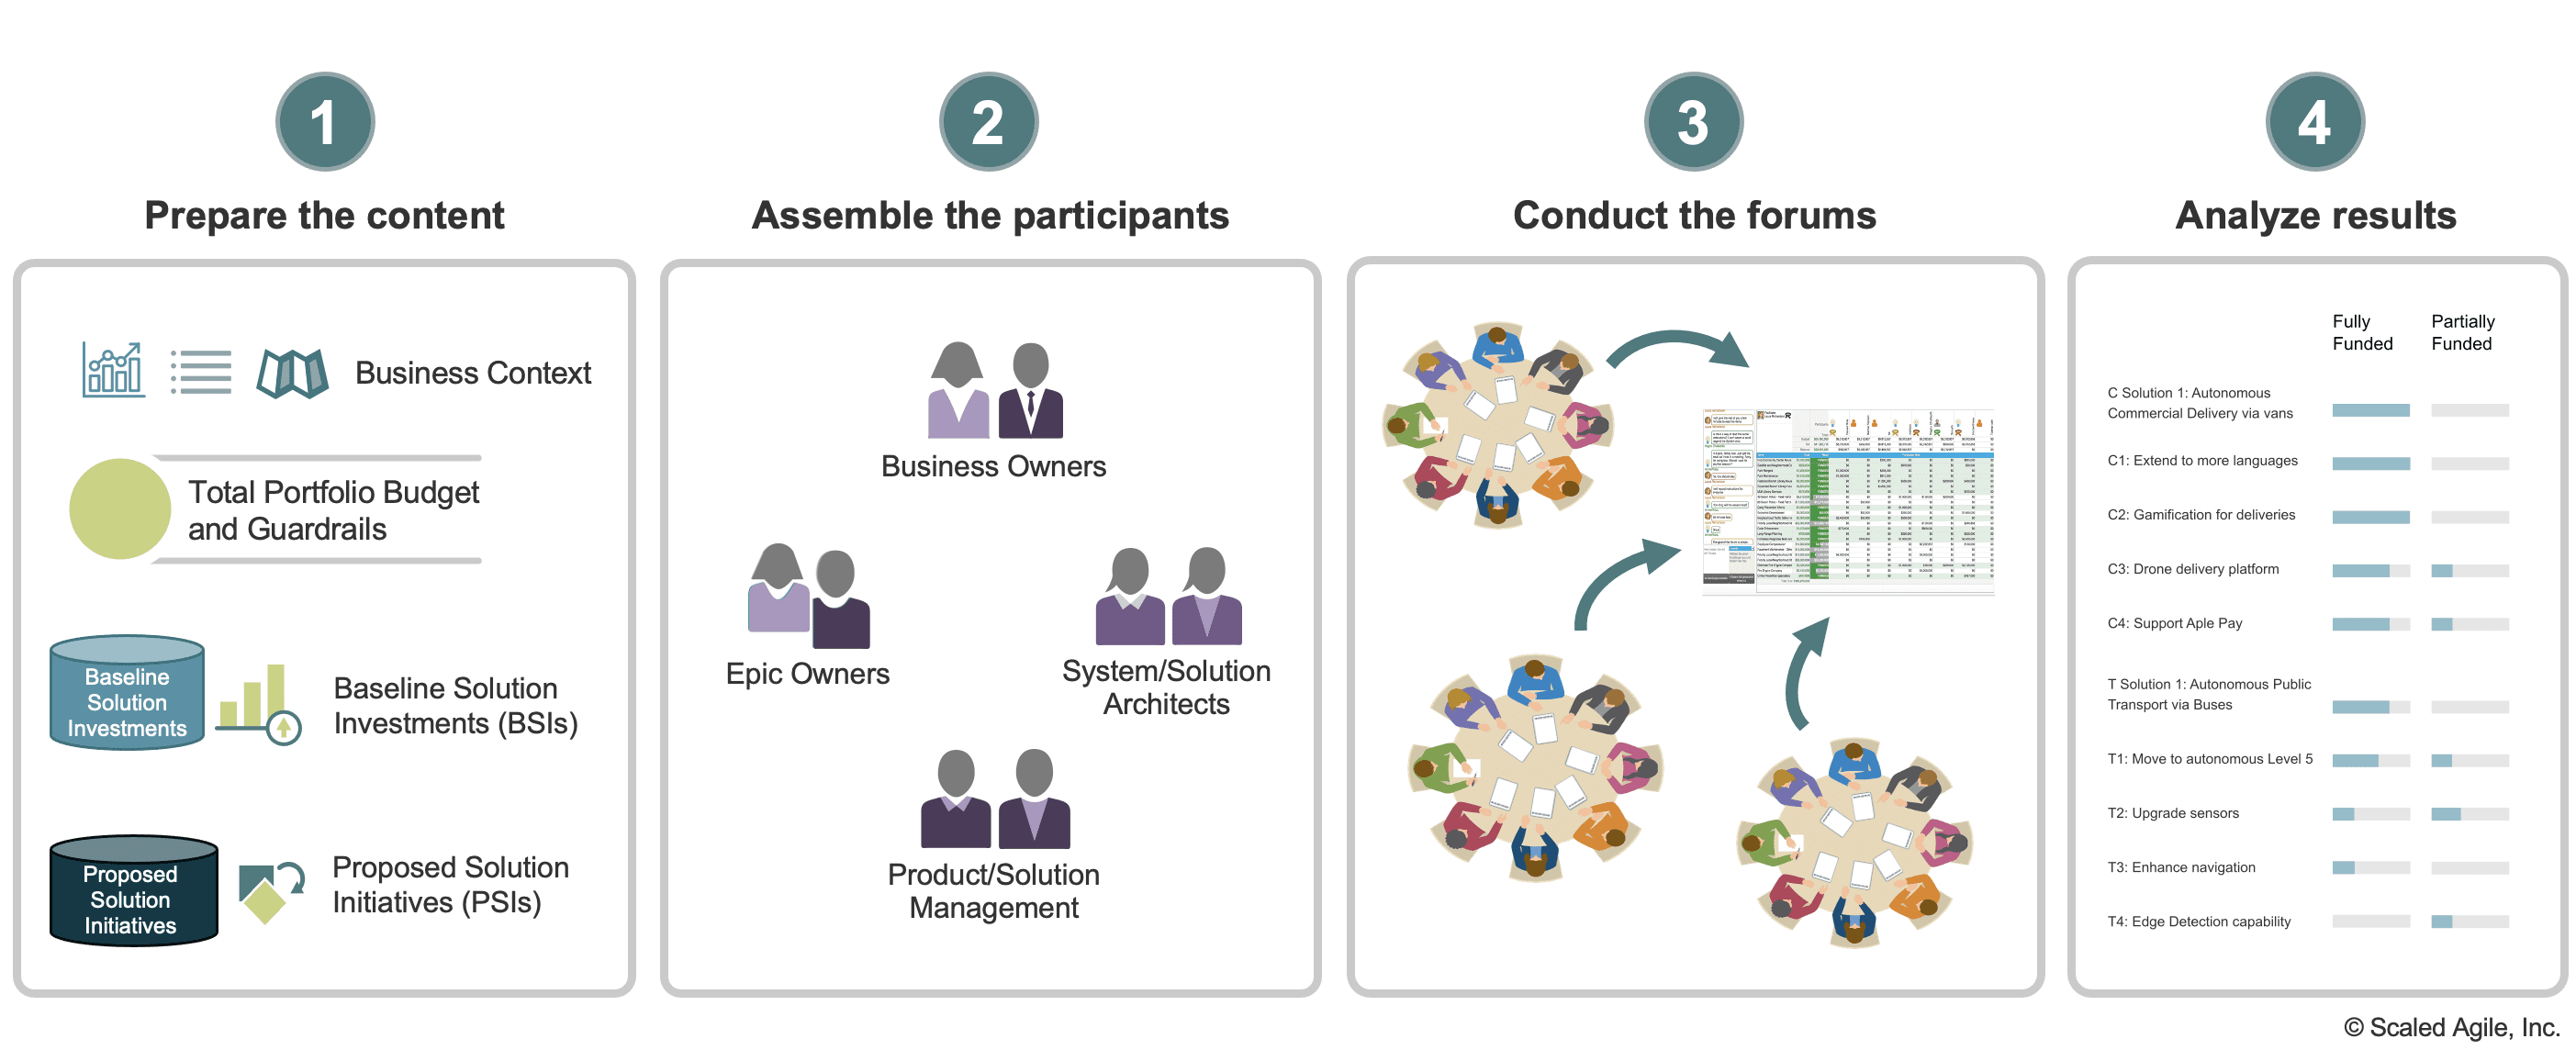 Figure 2: Overview of the Participatory Budgeting process